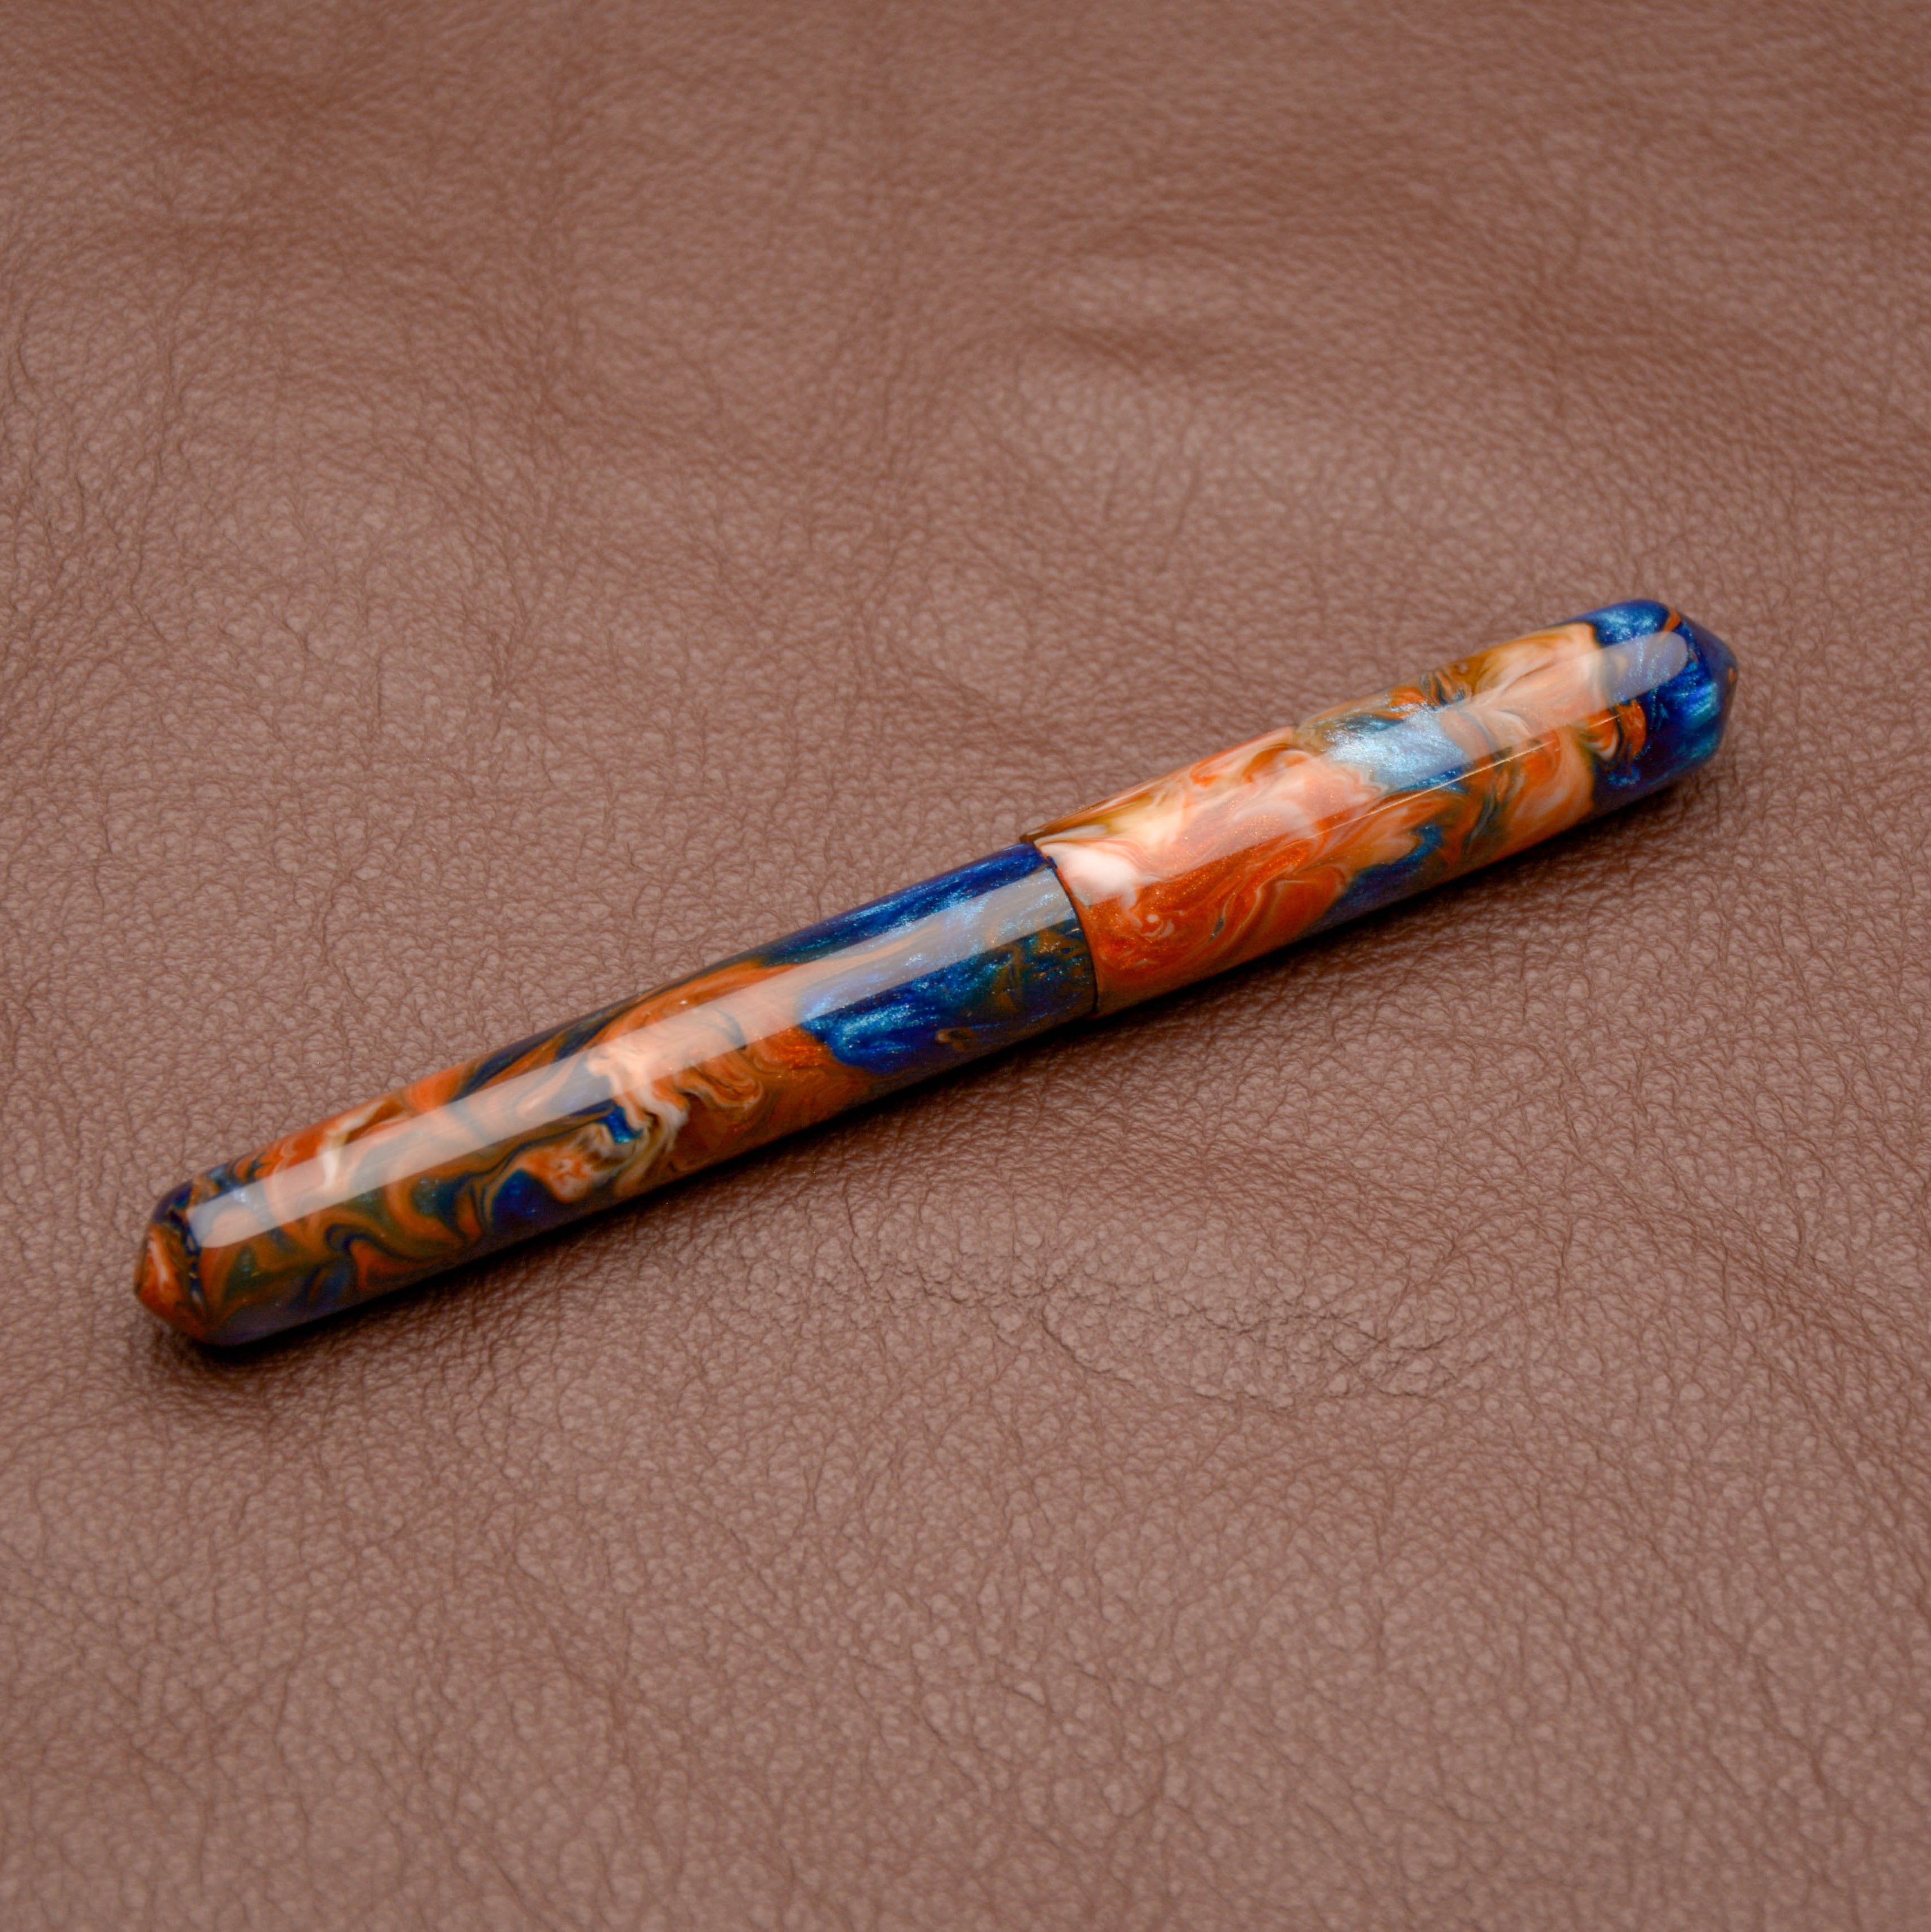 Fountain Pen - Bock #6 - 13 mm - In-house cast with multiple tones of blue, orange-brown and white.